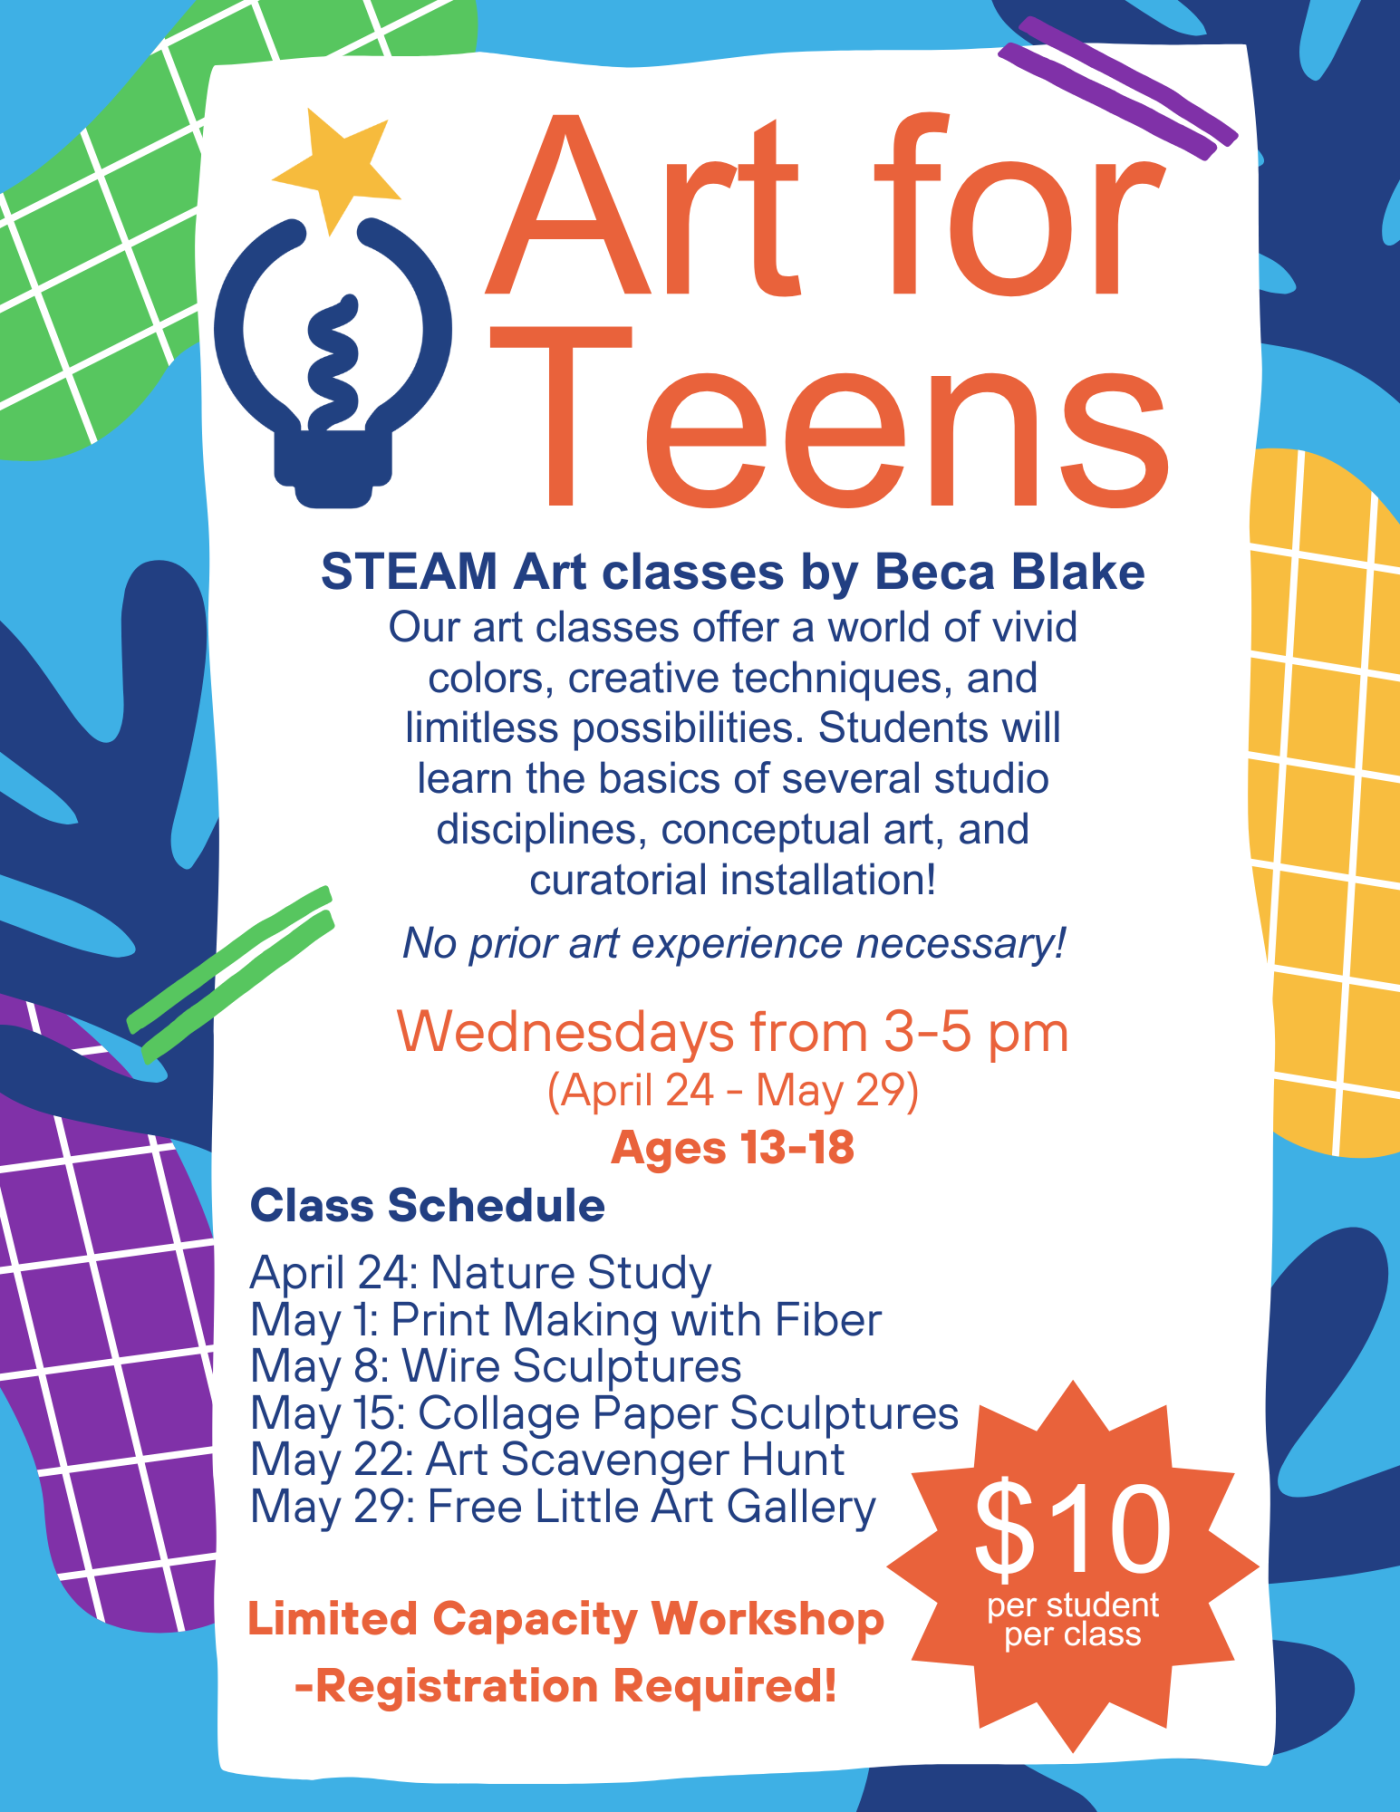 Art for Teens with Beca Blake. Wednesday classes are $10 per. Call for more info: 541-482-6767